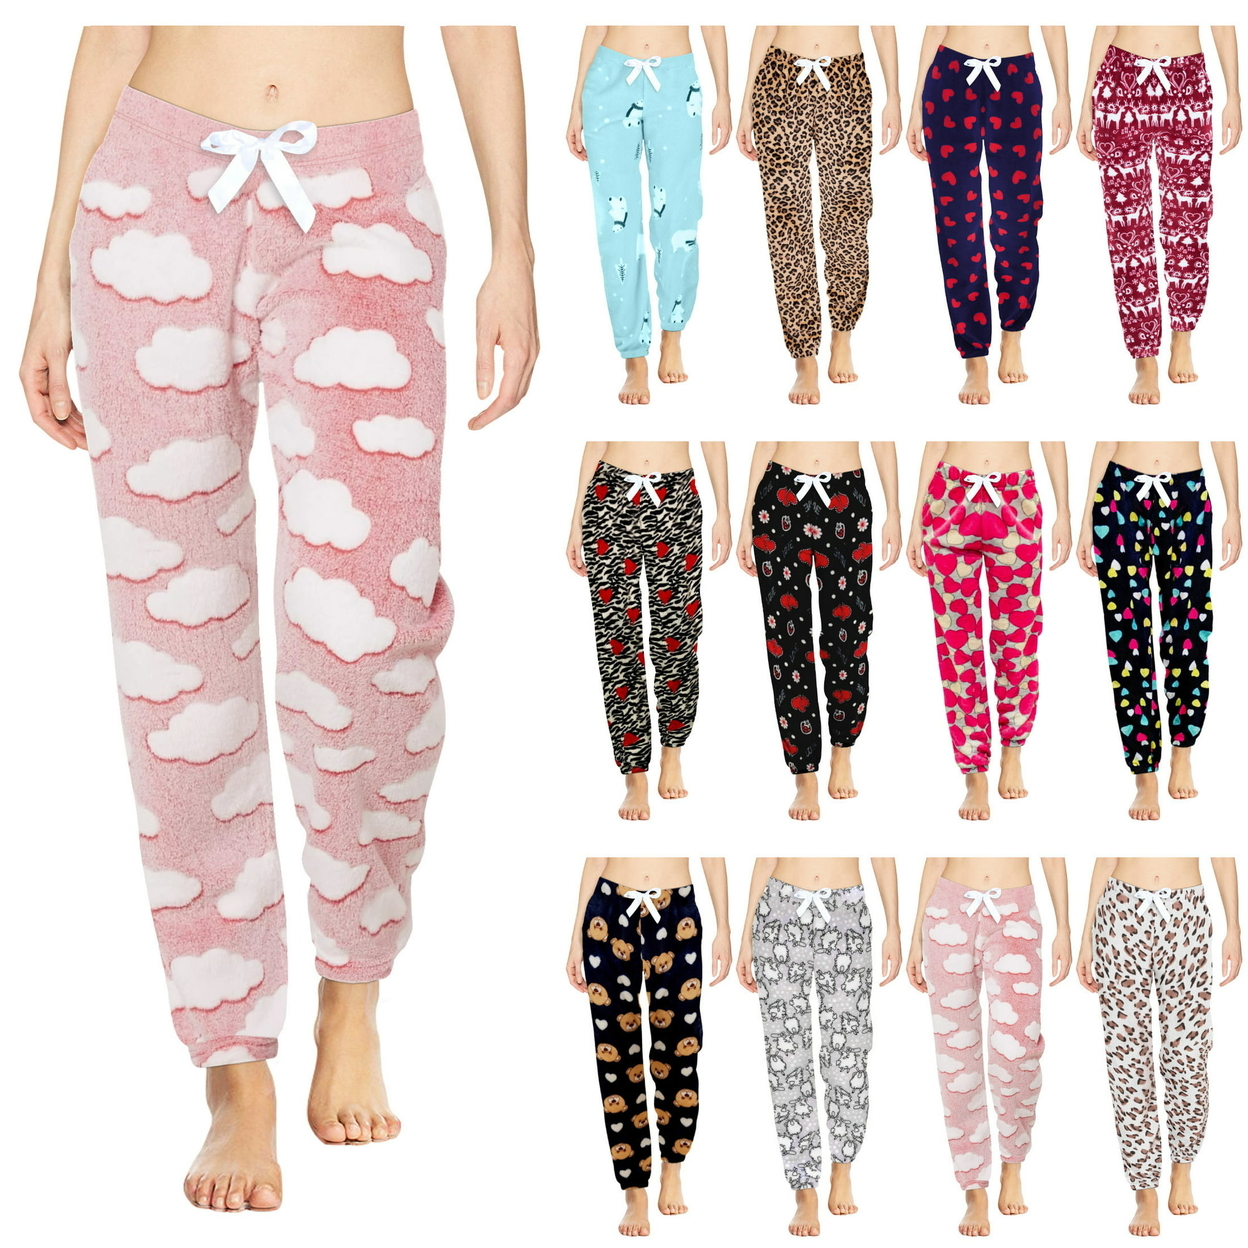 3-Pack: Women's Solid & Printed Ultra-Soft Comfy Stretch Micro-Fleece Pajama Lounge Pants - X-large, Love